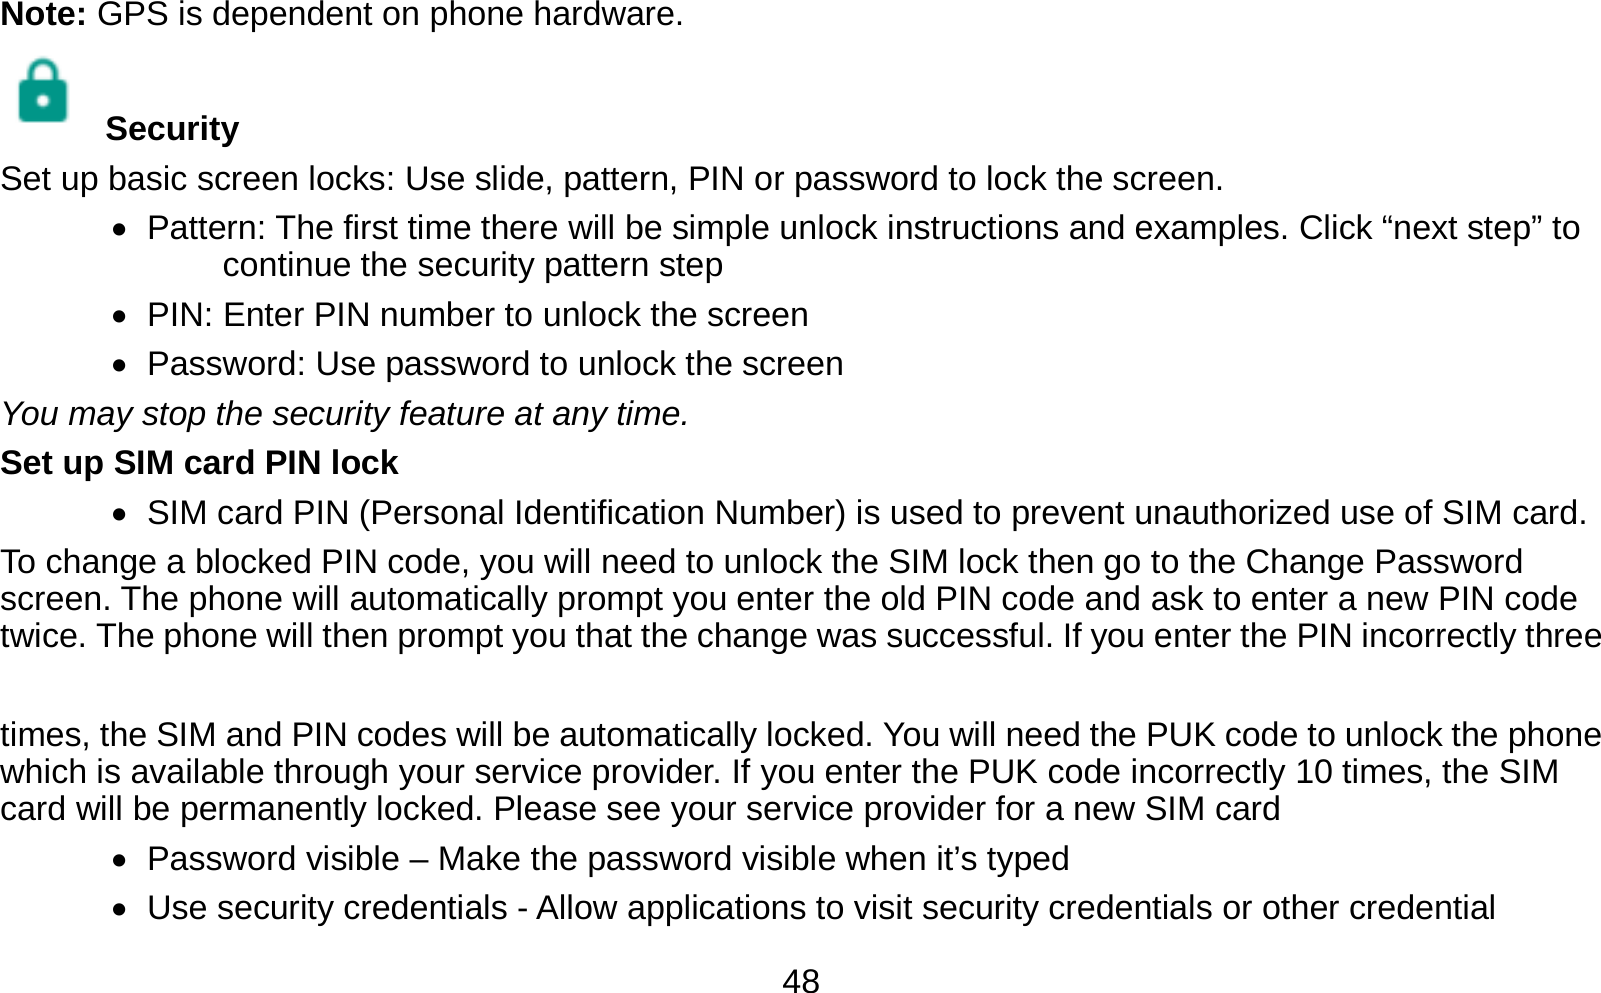   48Note: GPS is dependent on phone hardware.  Security  Set up basic screen locks: Use slide, pattern, PIN or password to lock the screen.      Pattern: The first time there will be simple unlock instructions and examples. Click “next step” to continue the security pattern step    PIN: Enter PIN number to unlock the screen    Password: Use password to unlock the screen You may stop the security feature at any time. Set up SIM card PIN lock    SIM card PIN (Personal Identification Number) is used to prevent unauthorized use of SIM card.   To change a blocked PIN code, you will need to unlock the SIM lock then go to the Change Password screen. The phone will automatically prompt you enter the old PIN code and ask to enter a new PIN code twice. The phone will then prompt you that the change was successful. If you enter the PIN incorrectly three    times, the SIM and PIN codes will be automatically locked. You will need the PUK code to unlock the phone which is available through your service provider. If you enter the PUK code incorrectly 10 times, the SIM card will be permanently locked. Please see your service provider for a new SIM card    Password visible – Make the password visible when it’s typed    Use security credentials - Allow applications to visit security credentials or other credential 